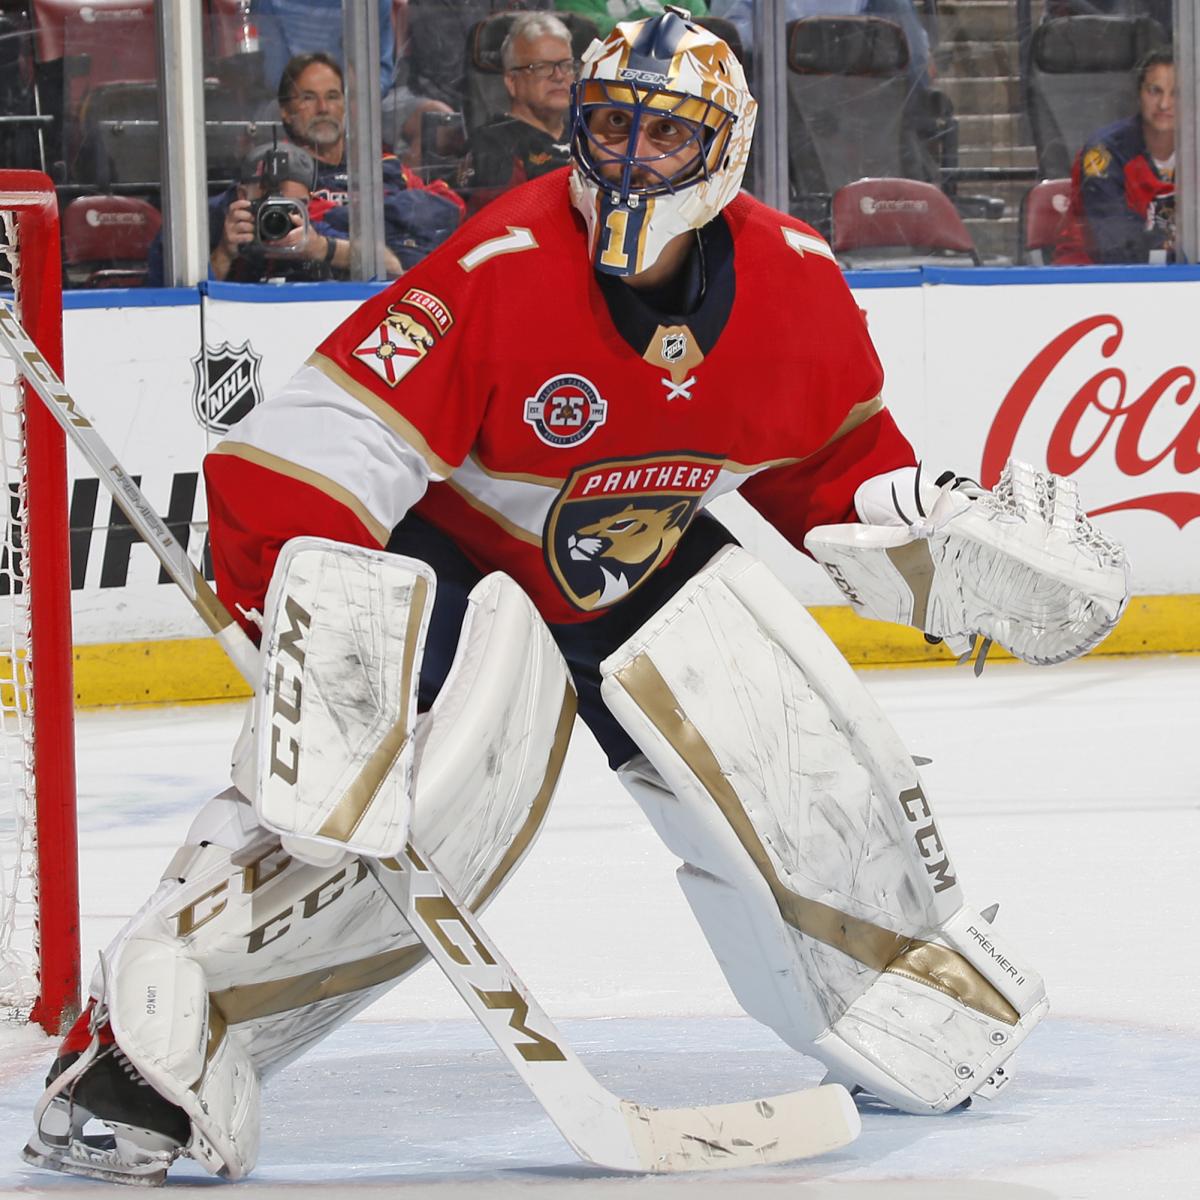 Report: Canucks trade goalie Roberto Luongo to Panthers - Sports Illustrated